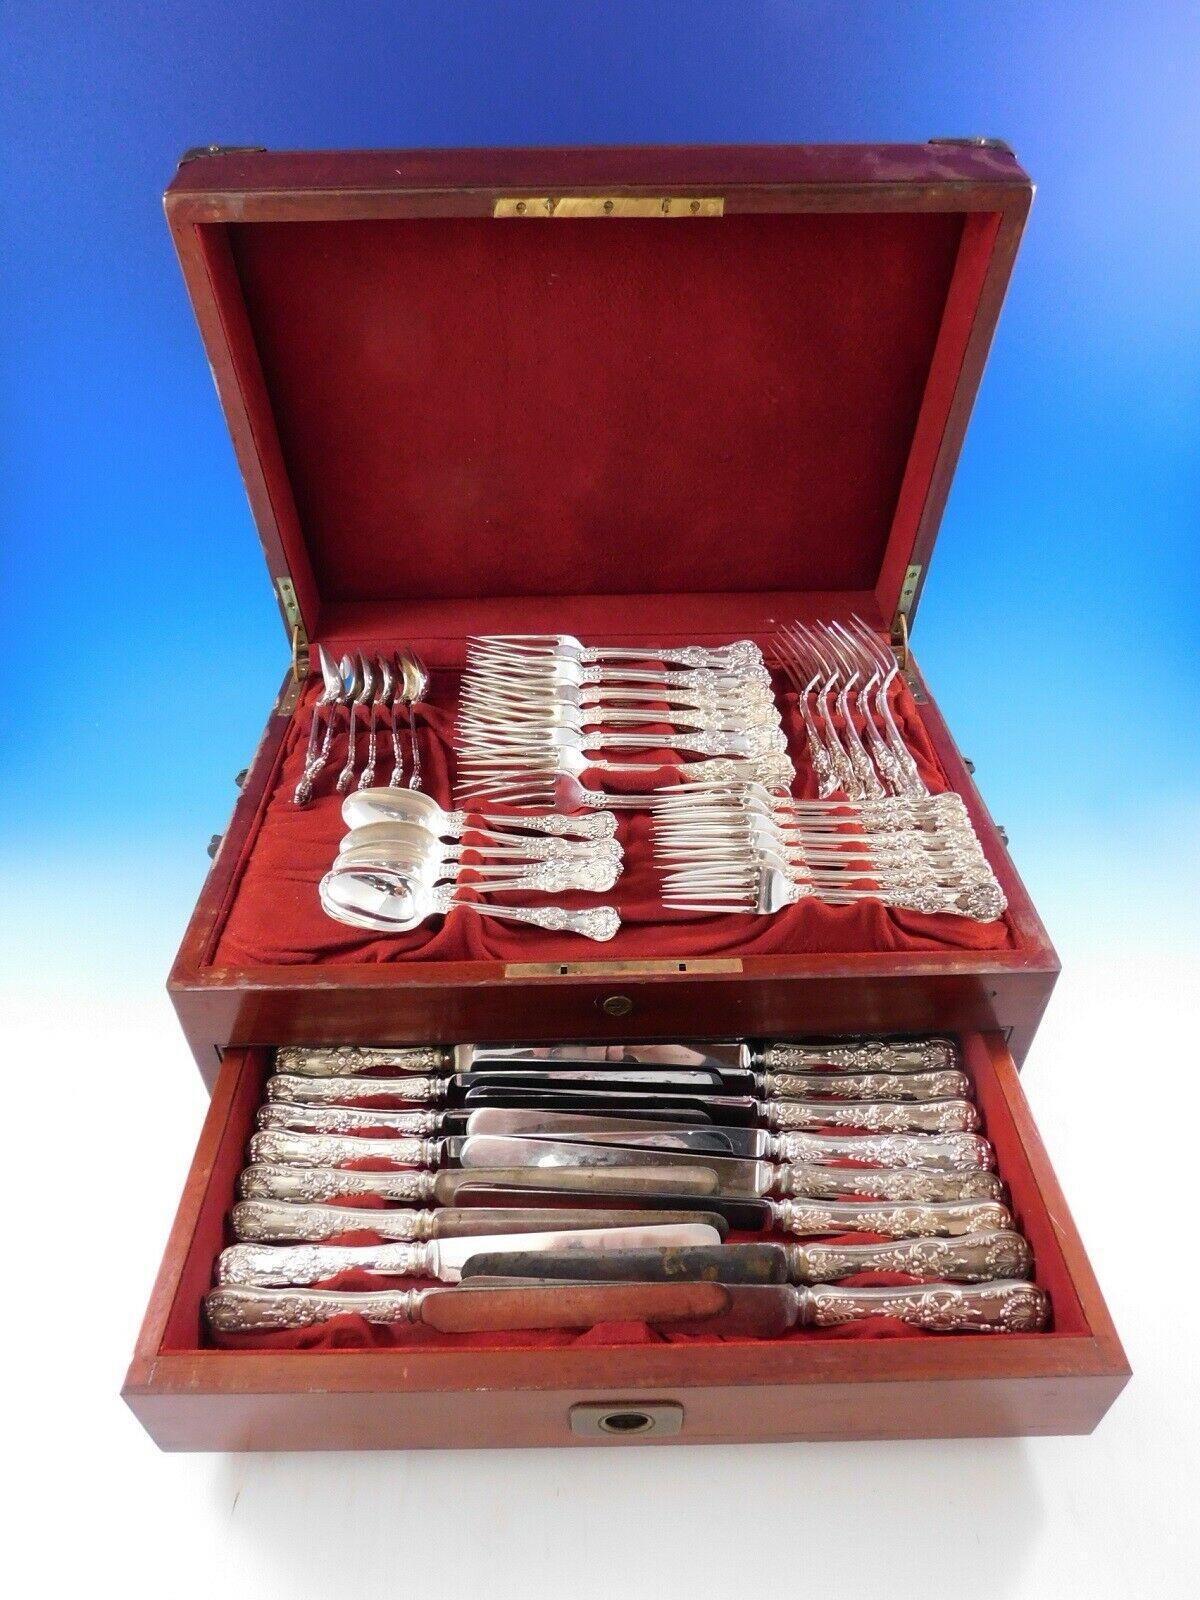 Superb English King by Tiffany & Co. sterling silver flatware set, 60 pieces. This set includes:

12 dinner size knives, with blunt stainless blades, 10 1/4